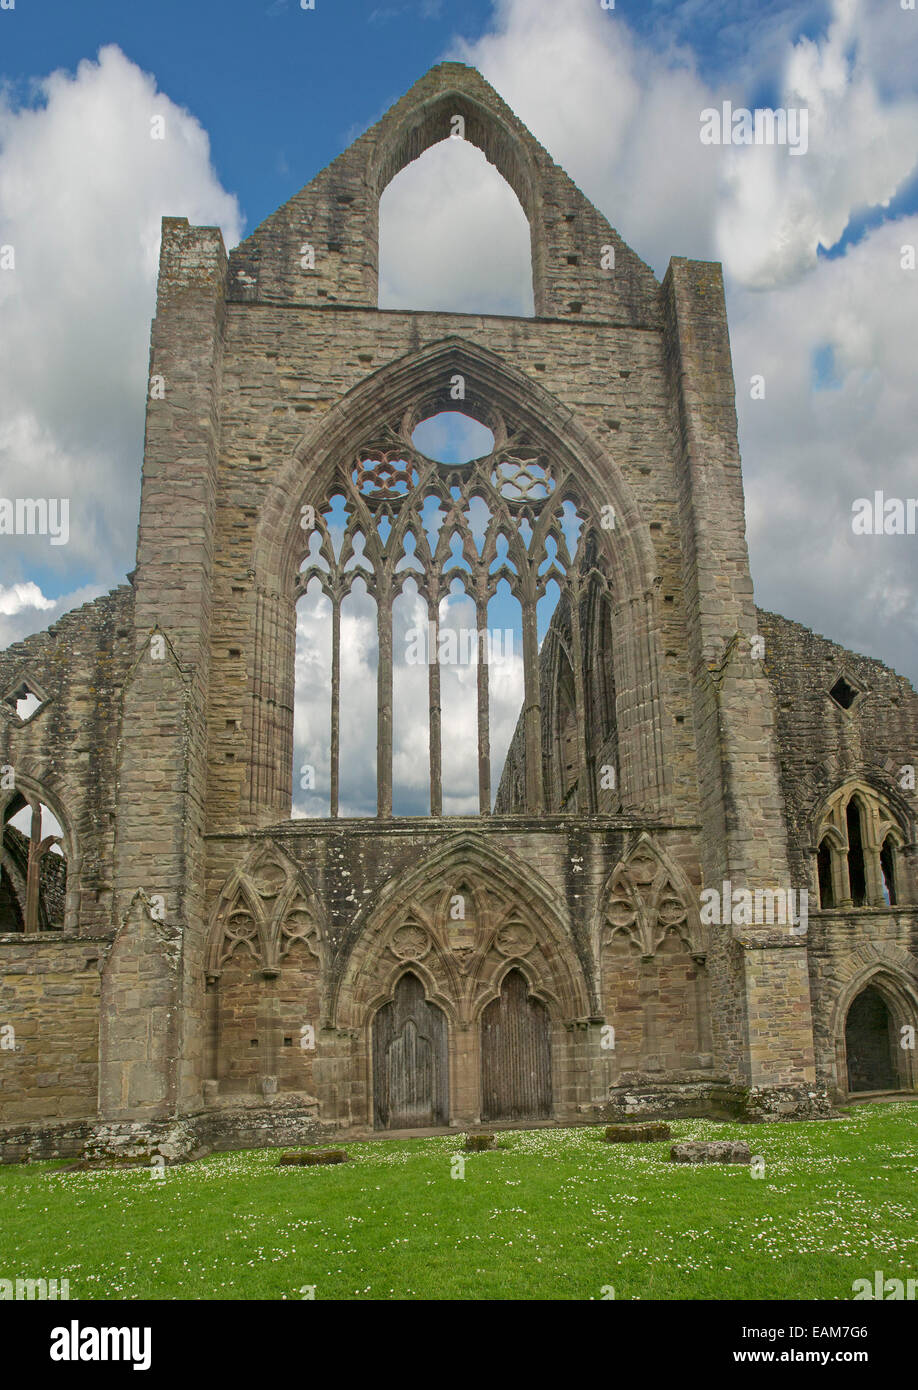 Spectacular facade of 12th century Tintern abbey with immense stone walls & decorative arched windows rising into blue sky Stock Photo